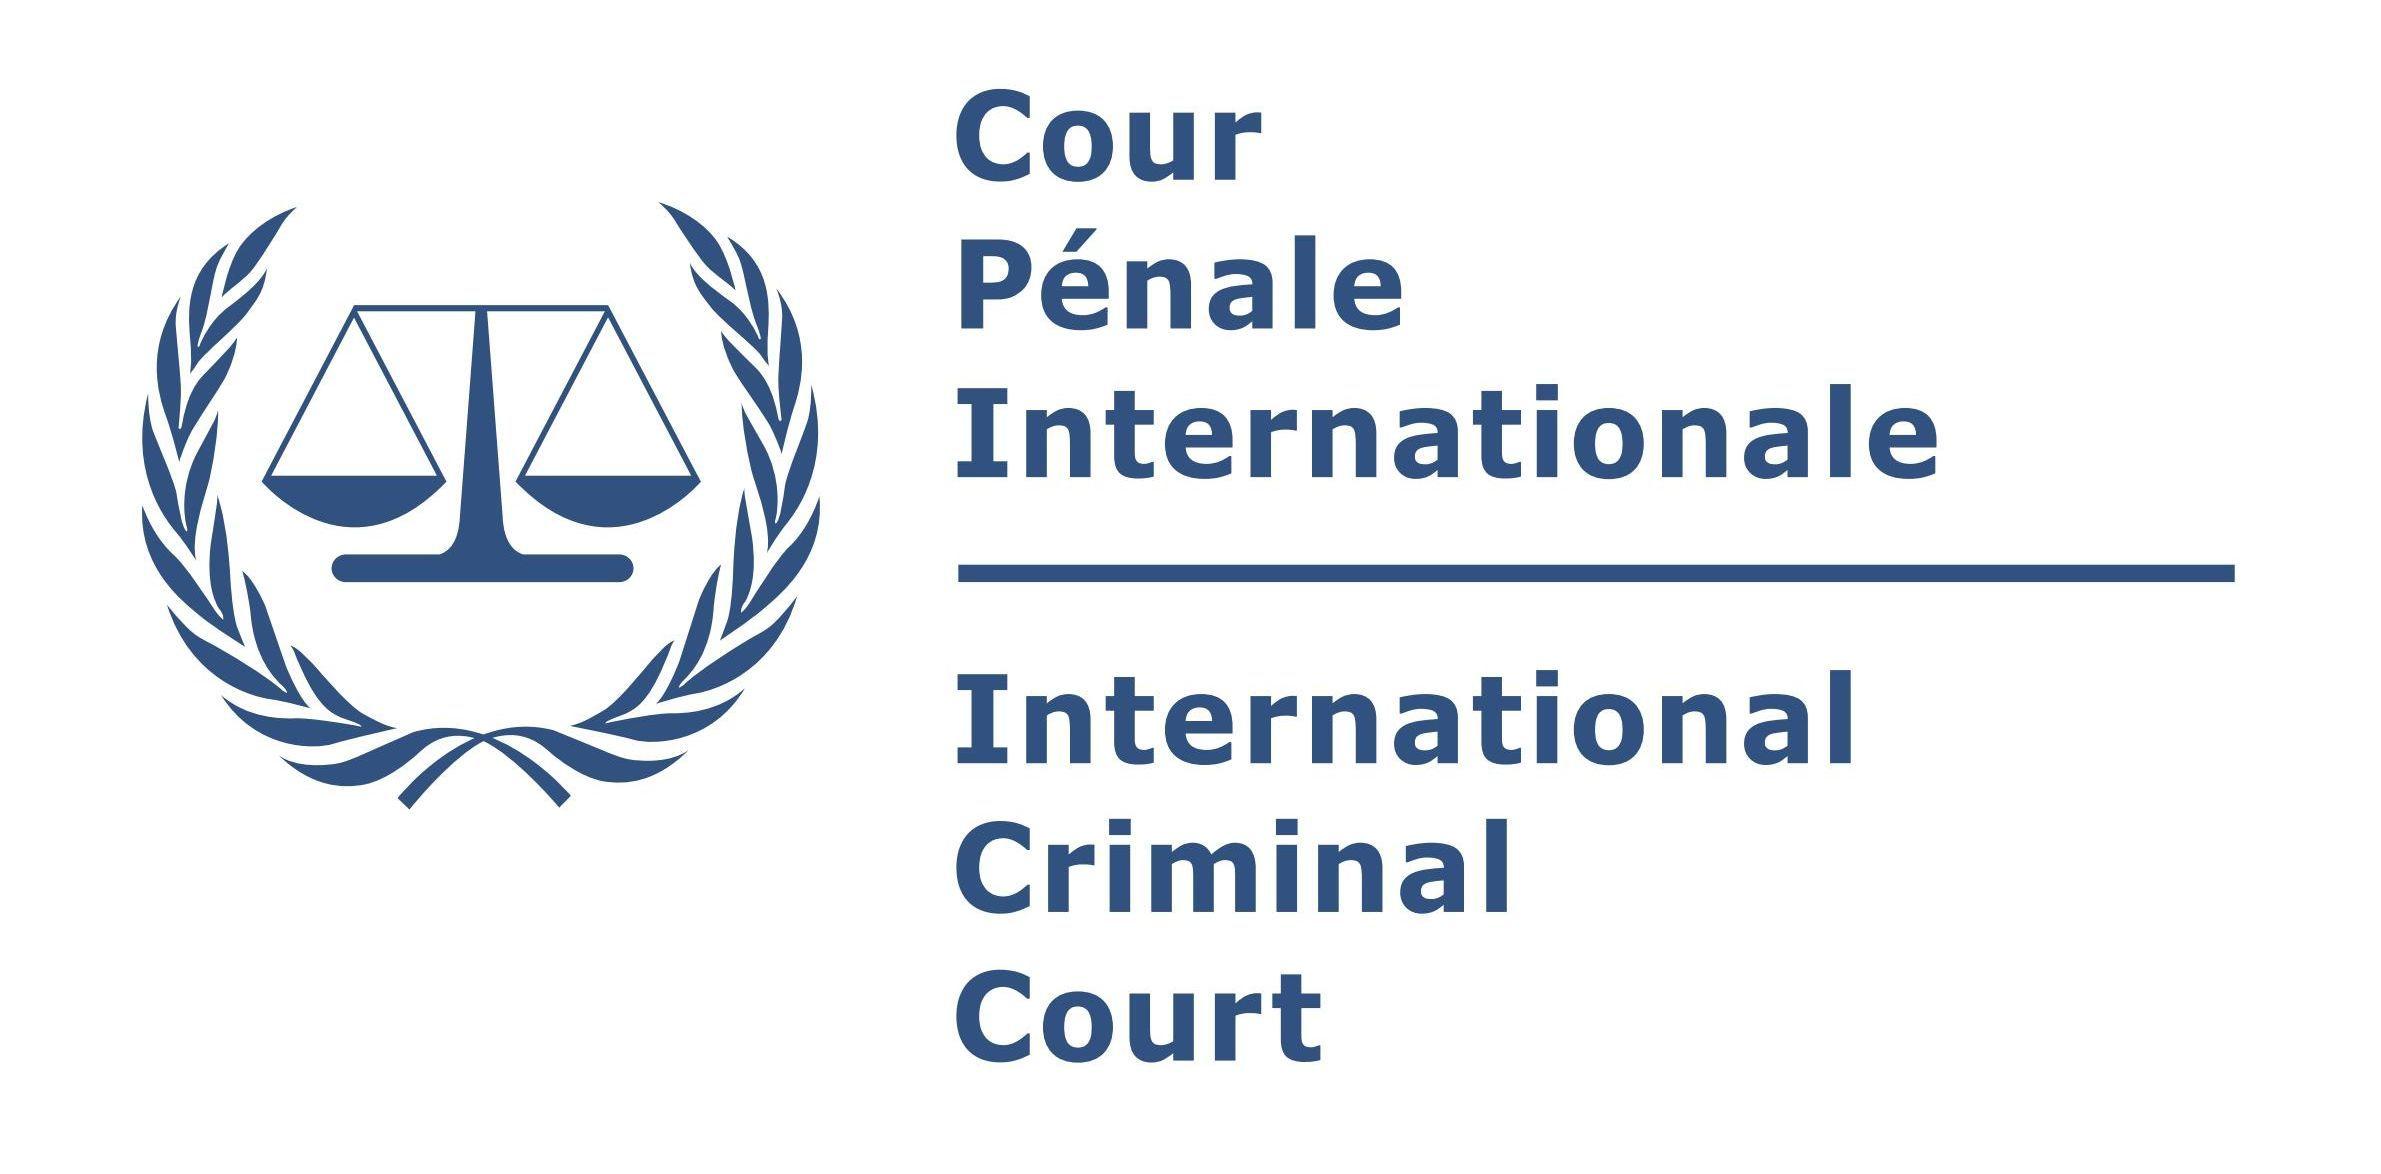 World Court Logo - 22 cases in 9 situations have been brought before the ICC ...